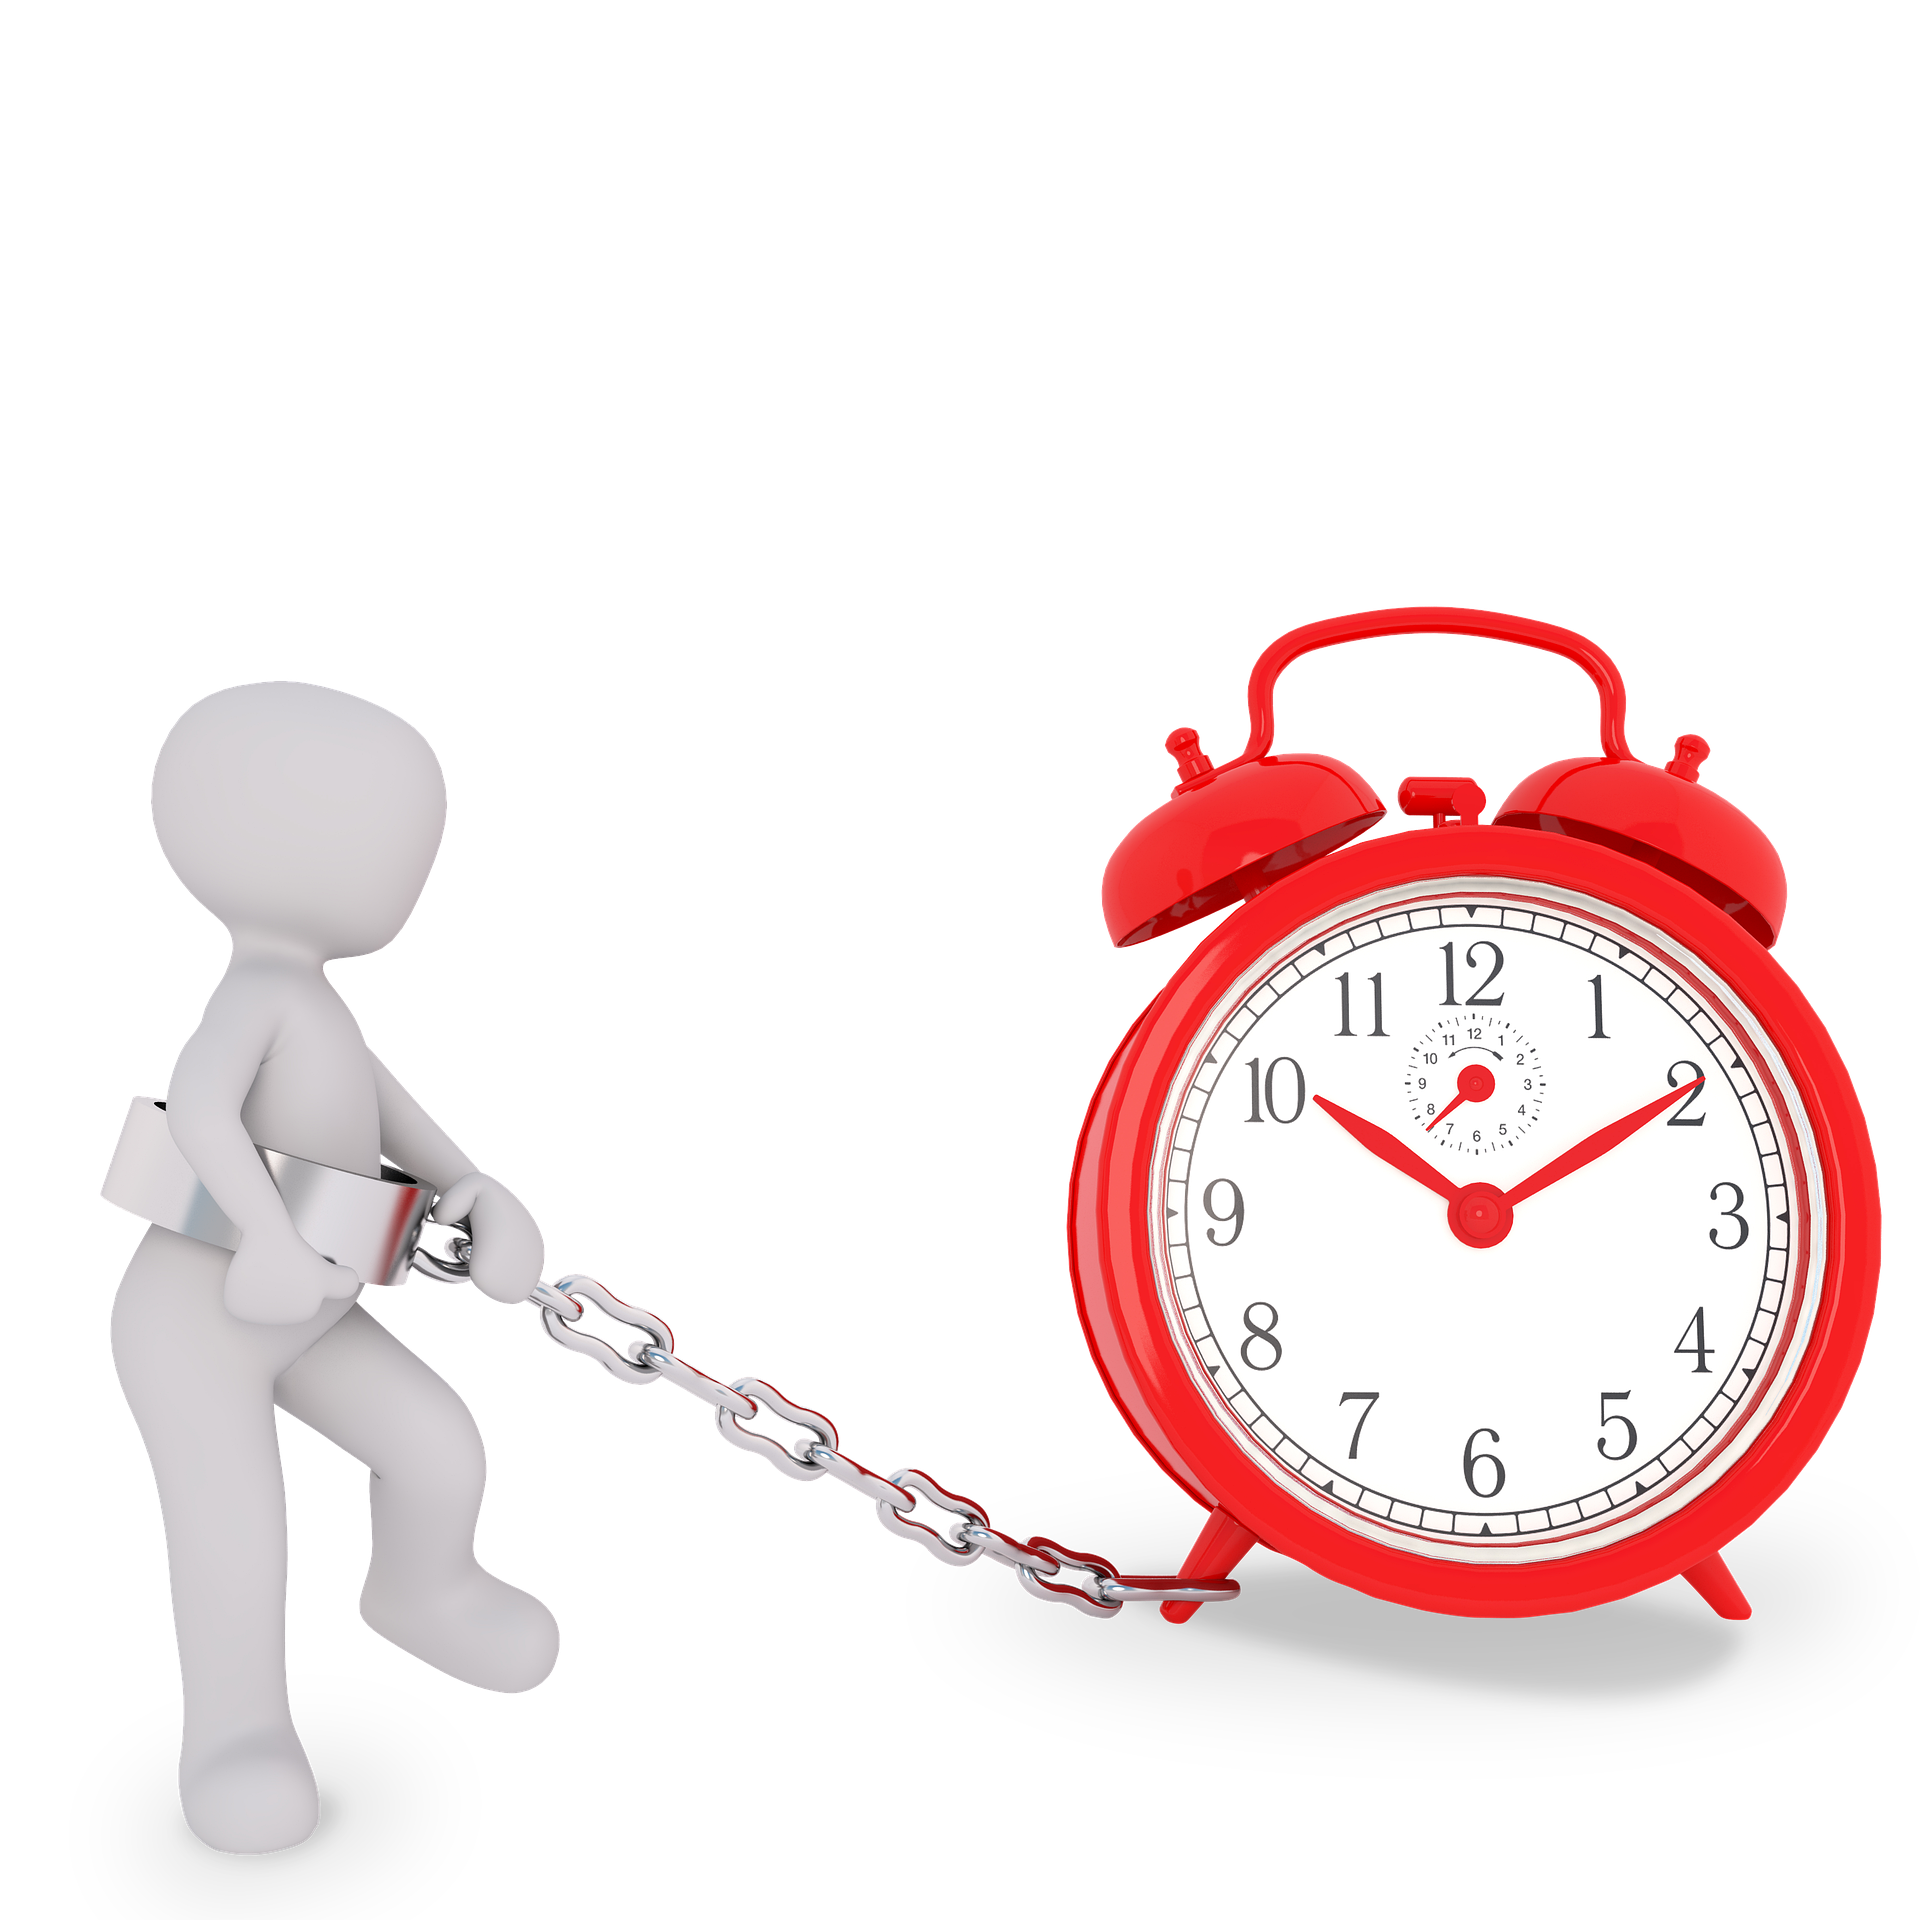 Time Freedom blogpost by PaTrisha-Anne Todd at CoachingLeadsToSuccess.com